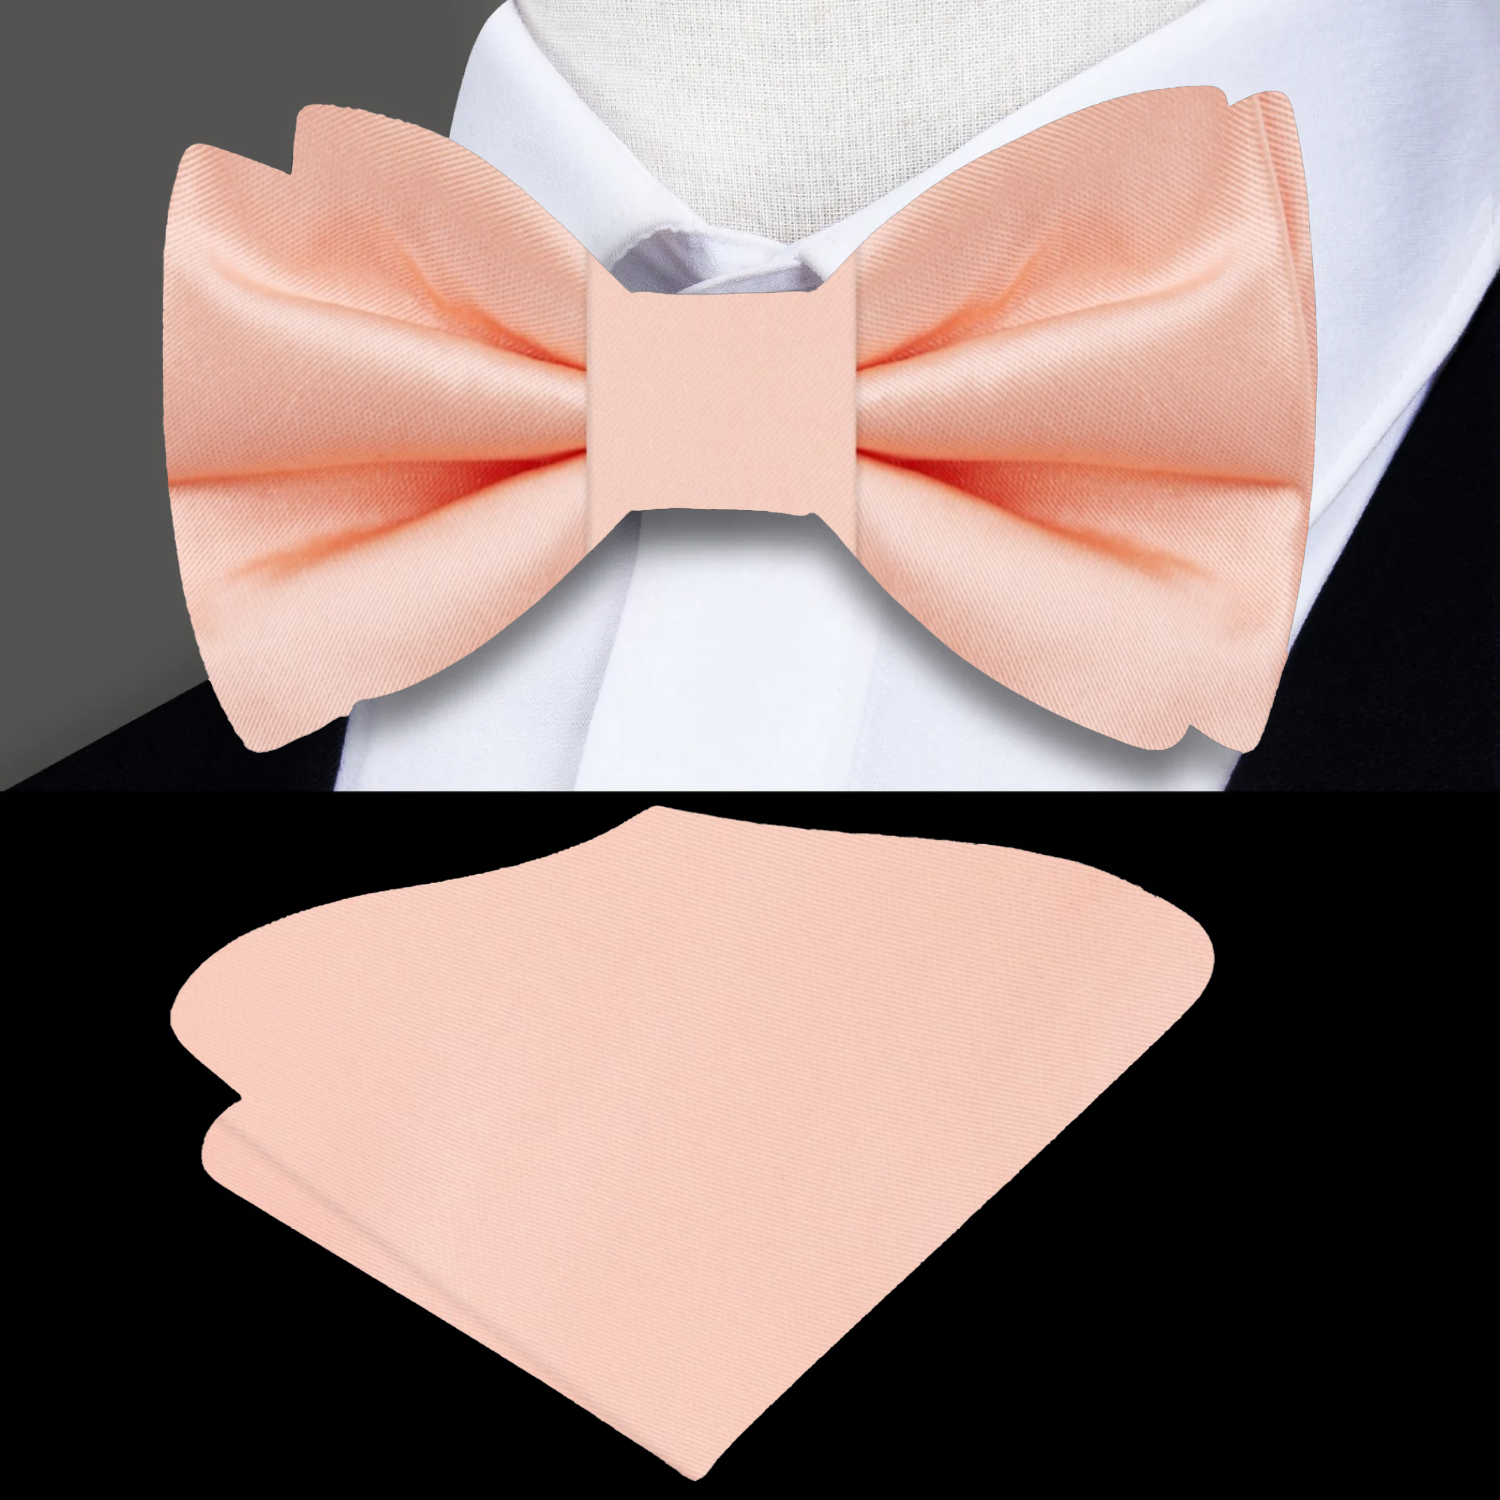 Solid Glossy Soap Orange Bow Tie and Pocket Square